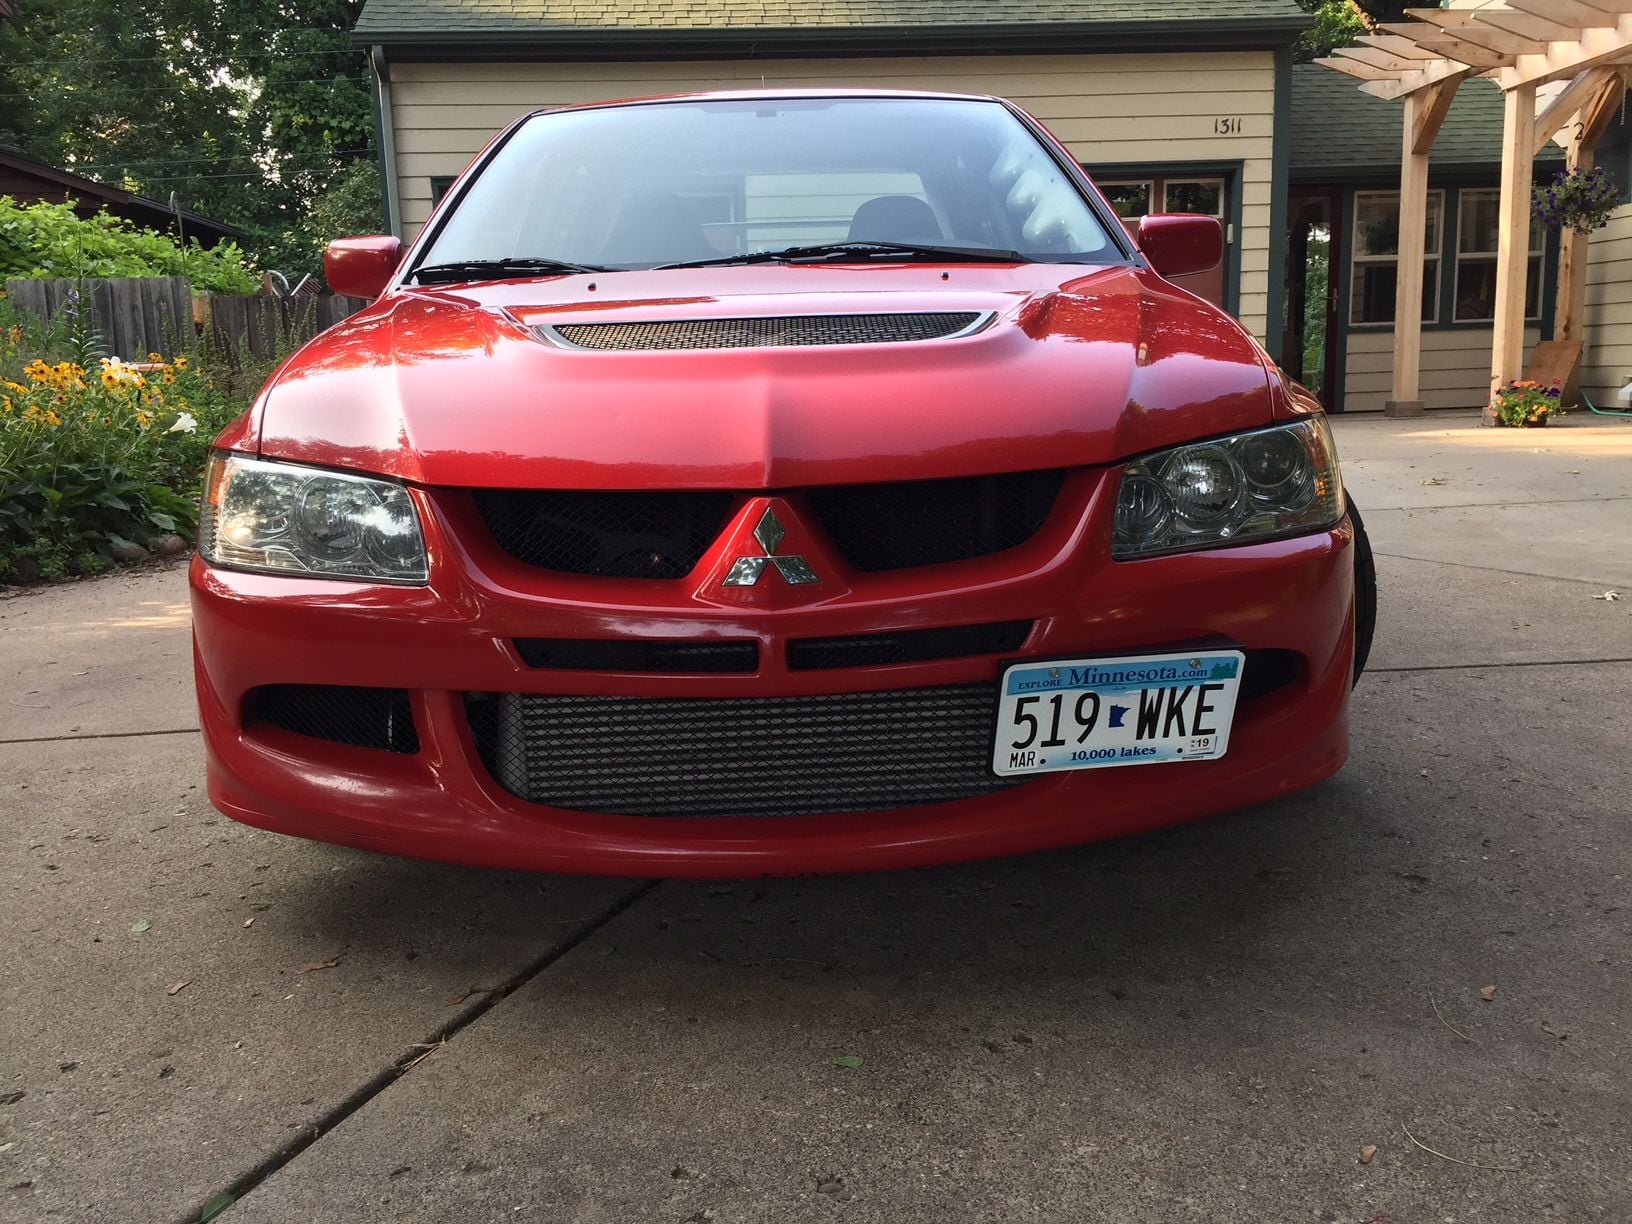 2003 Mitsubishi Lancer Evolution - Evo 8 in Excellent Condition - Used - VIN JA3AH86F73U090007 - 43,600 Miles - 4 cyl - AWD - Manual - Sedan - Red - St. Paul, MN 55110, United States